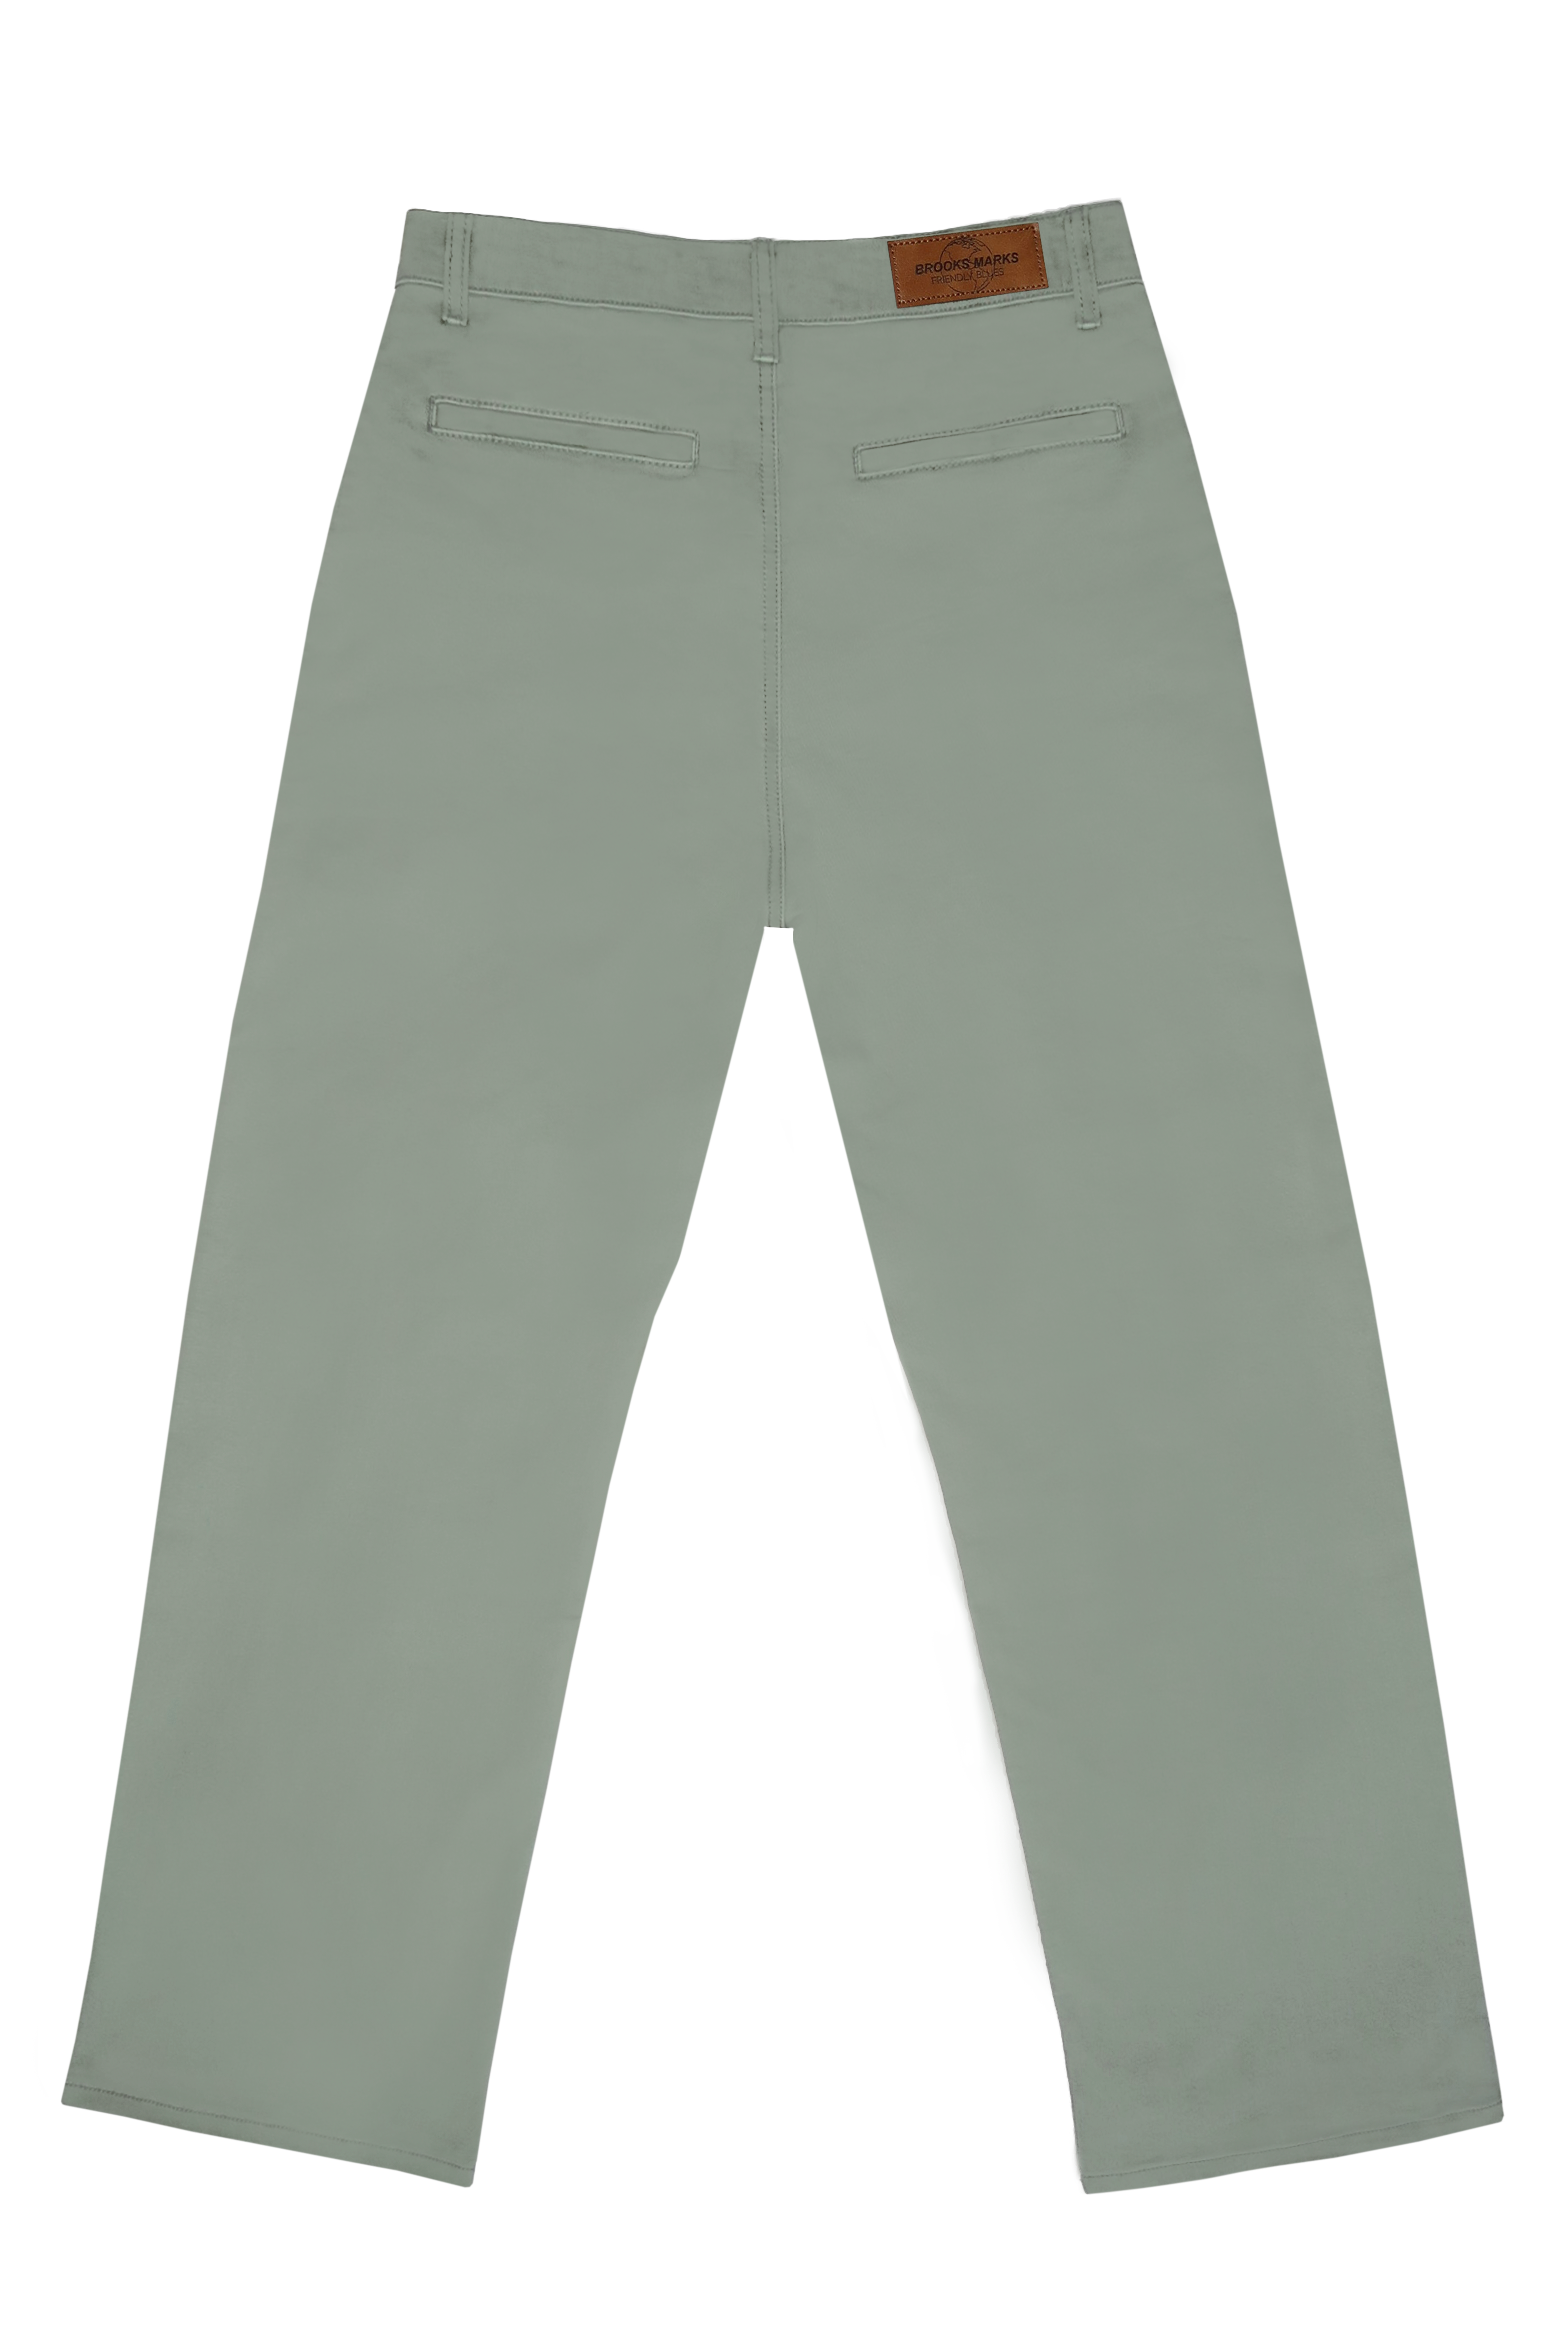 Business Woman Light Olive Green Wide-Leg Trouser Pants | Green pants  outfit, Olive pants outfit, Green trousers outfit